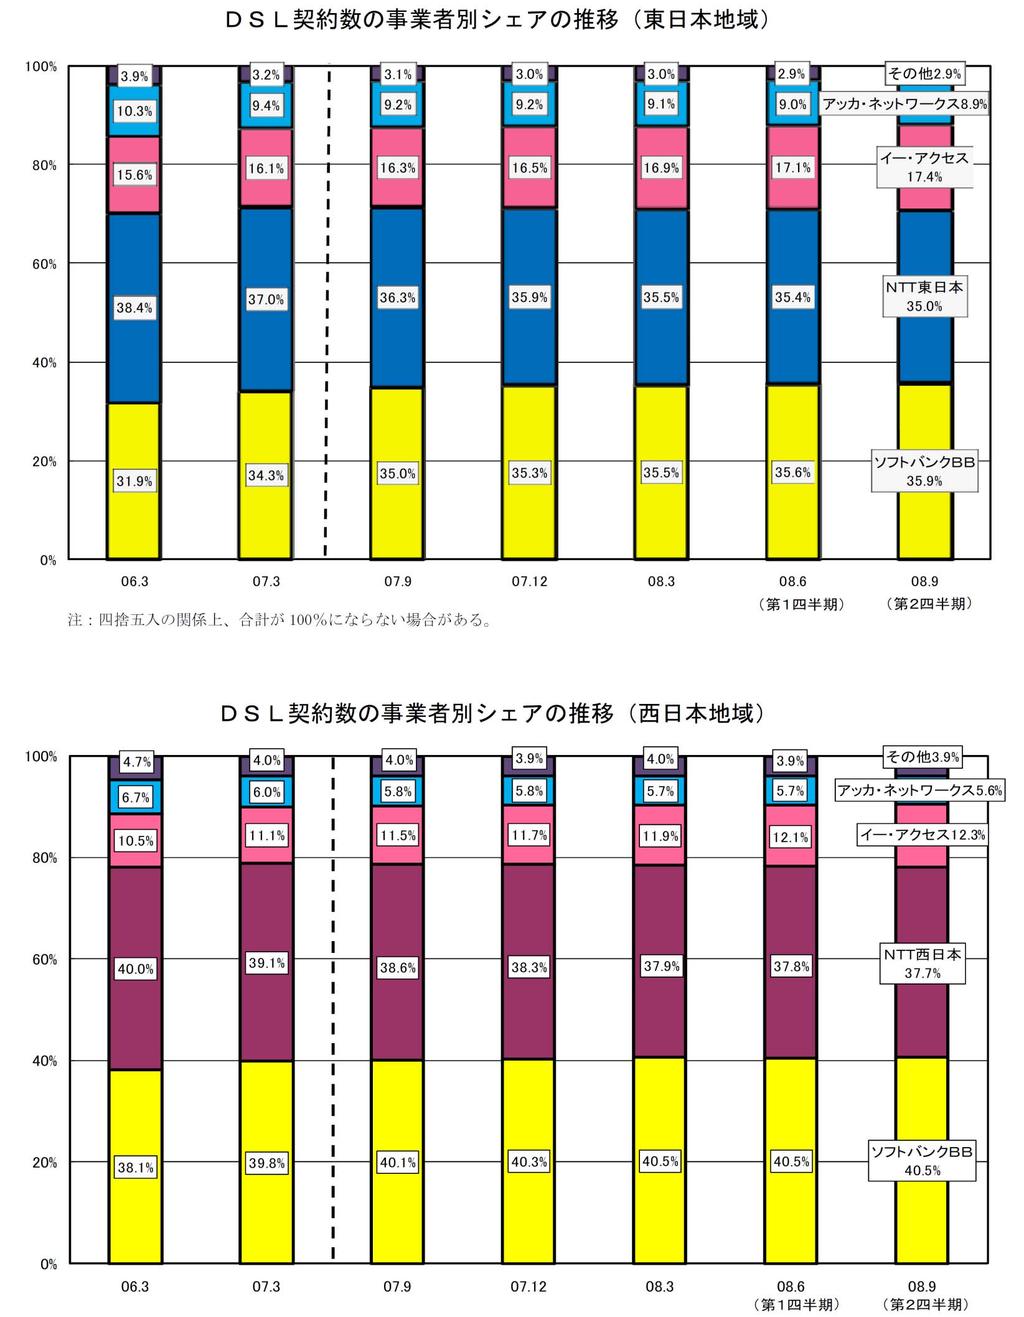 Carrier Share of DSL Subscriptions (East Japan) 2.9% ACCA Networks 8.9% eaccess 17.4% 35.0% 35.